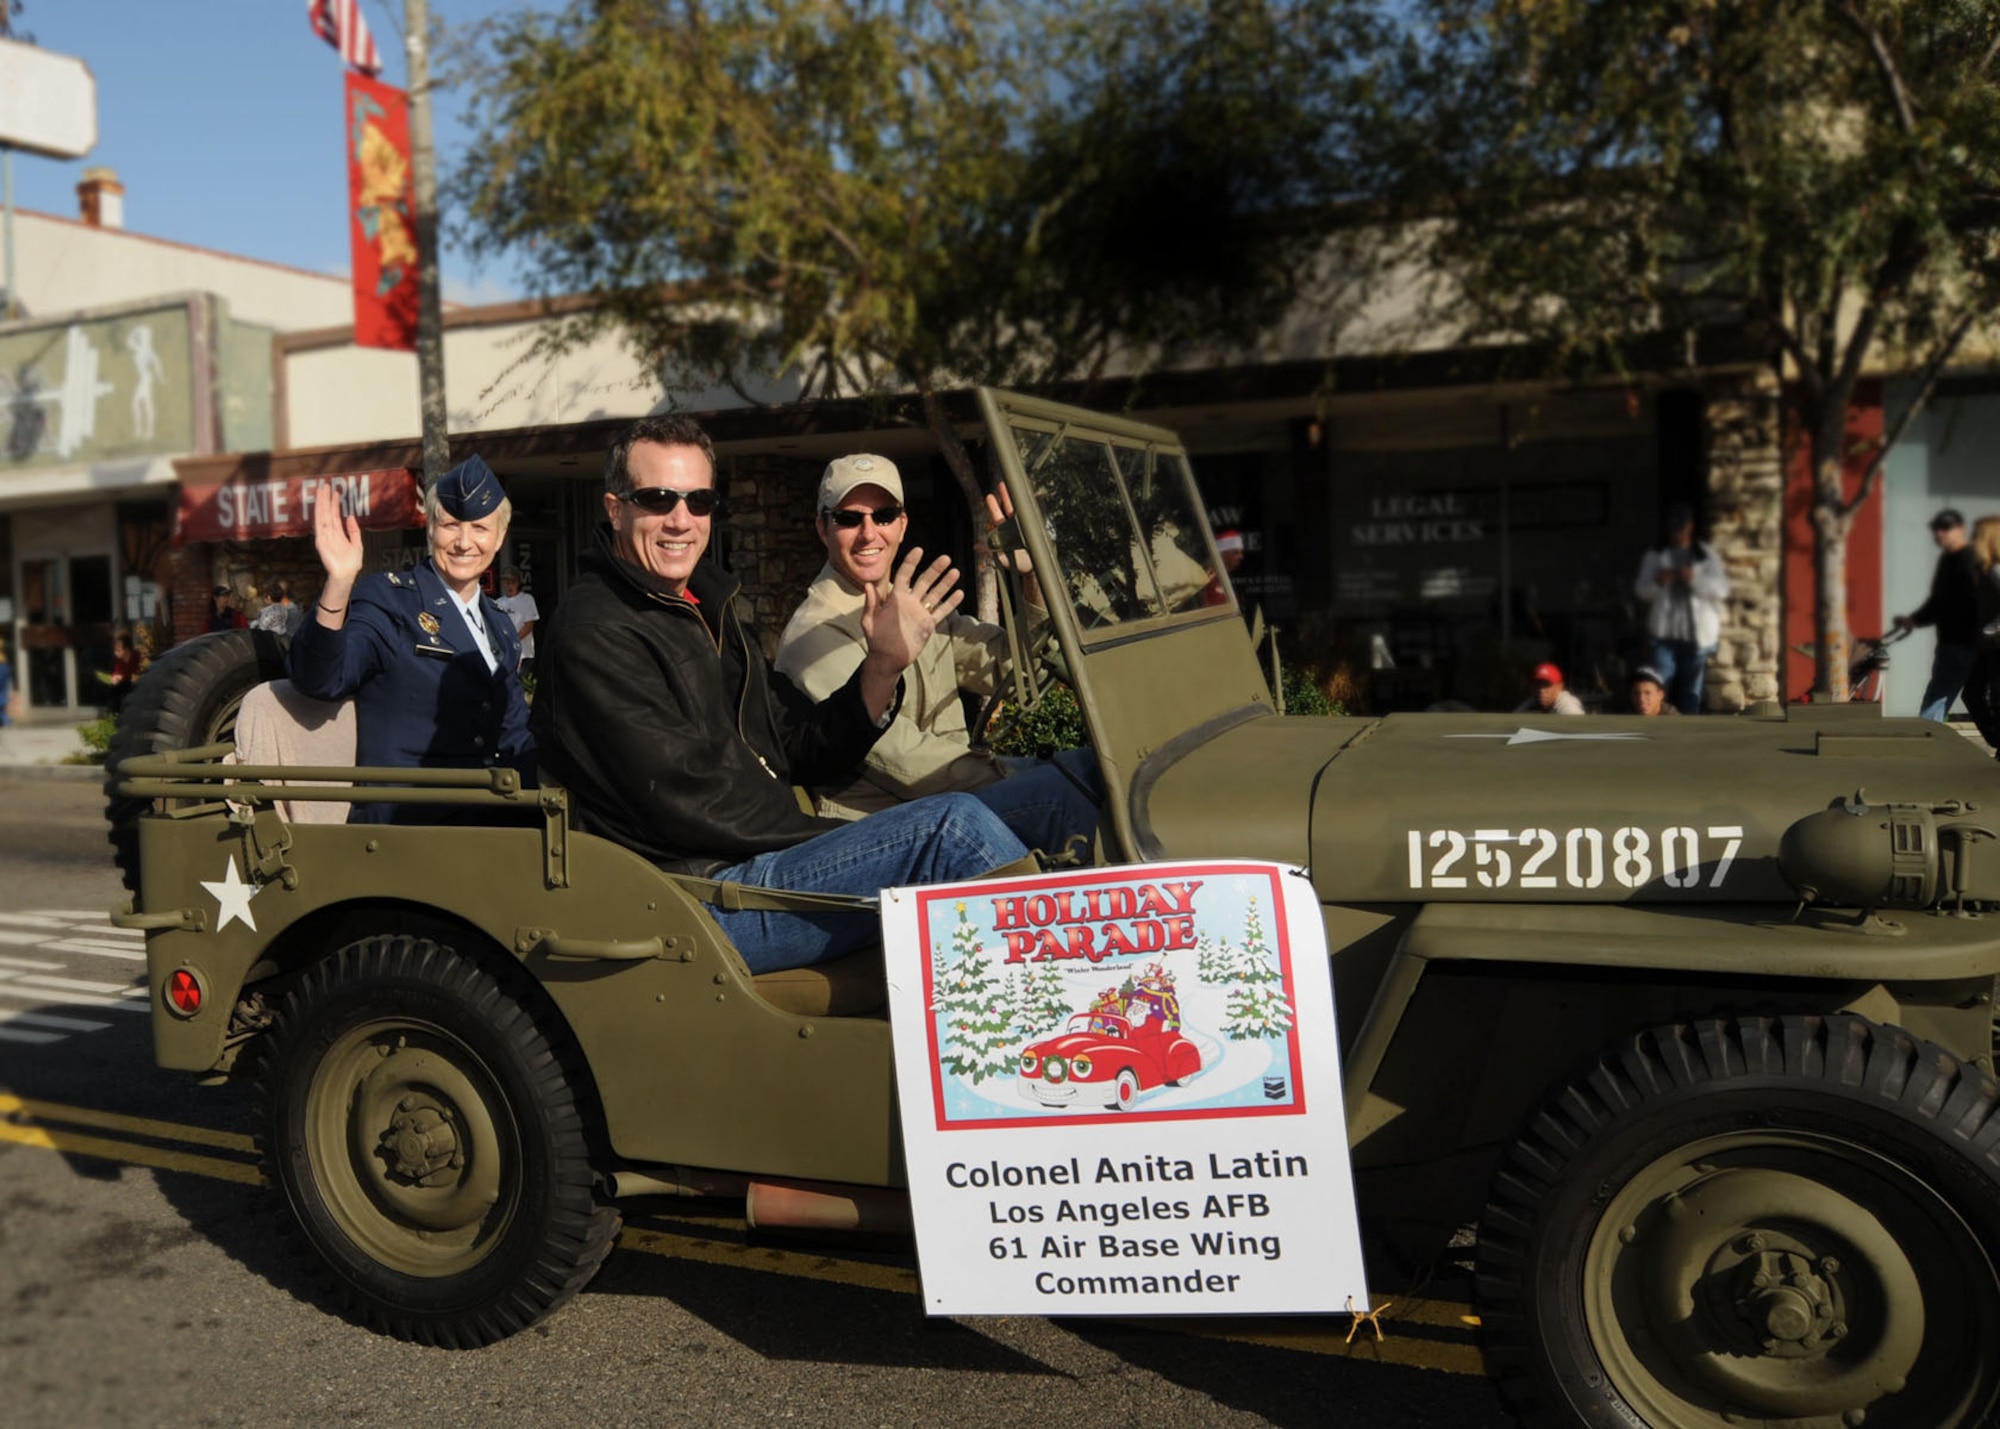 Col. Anita Latin, 61st Air Base Wing commander, and her husband Lyle Cantrell rode in a vintage jeep in El Segundo’s annual Holiday Parade, Dec. 13. (Photo by Lou Hernandez)